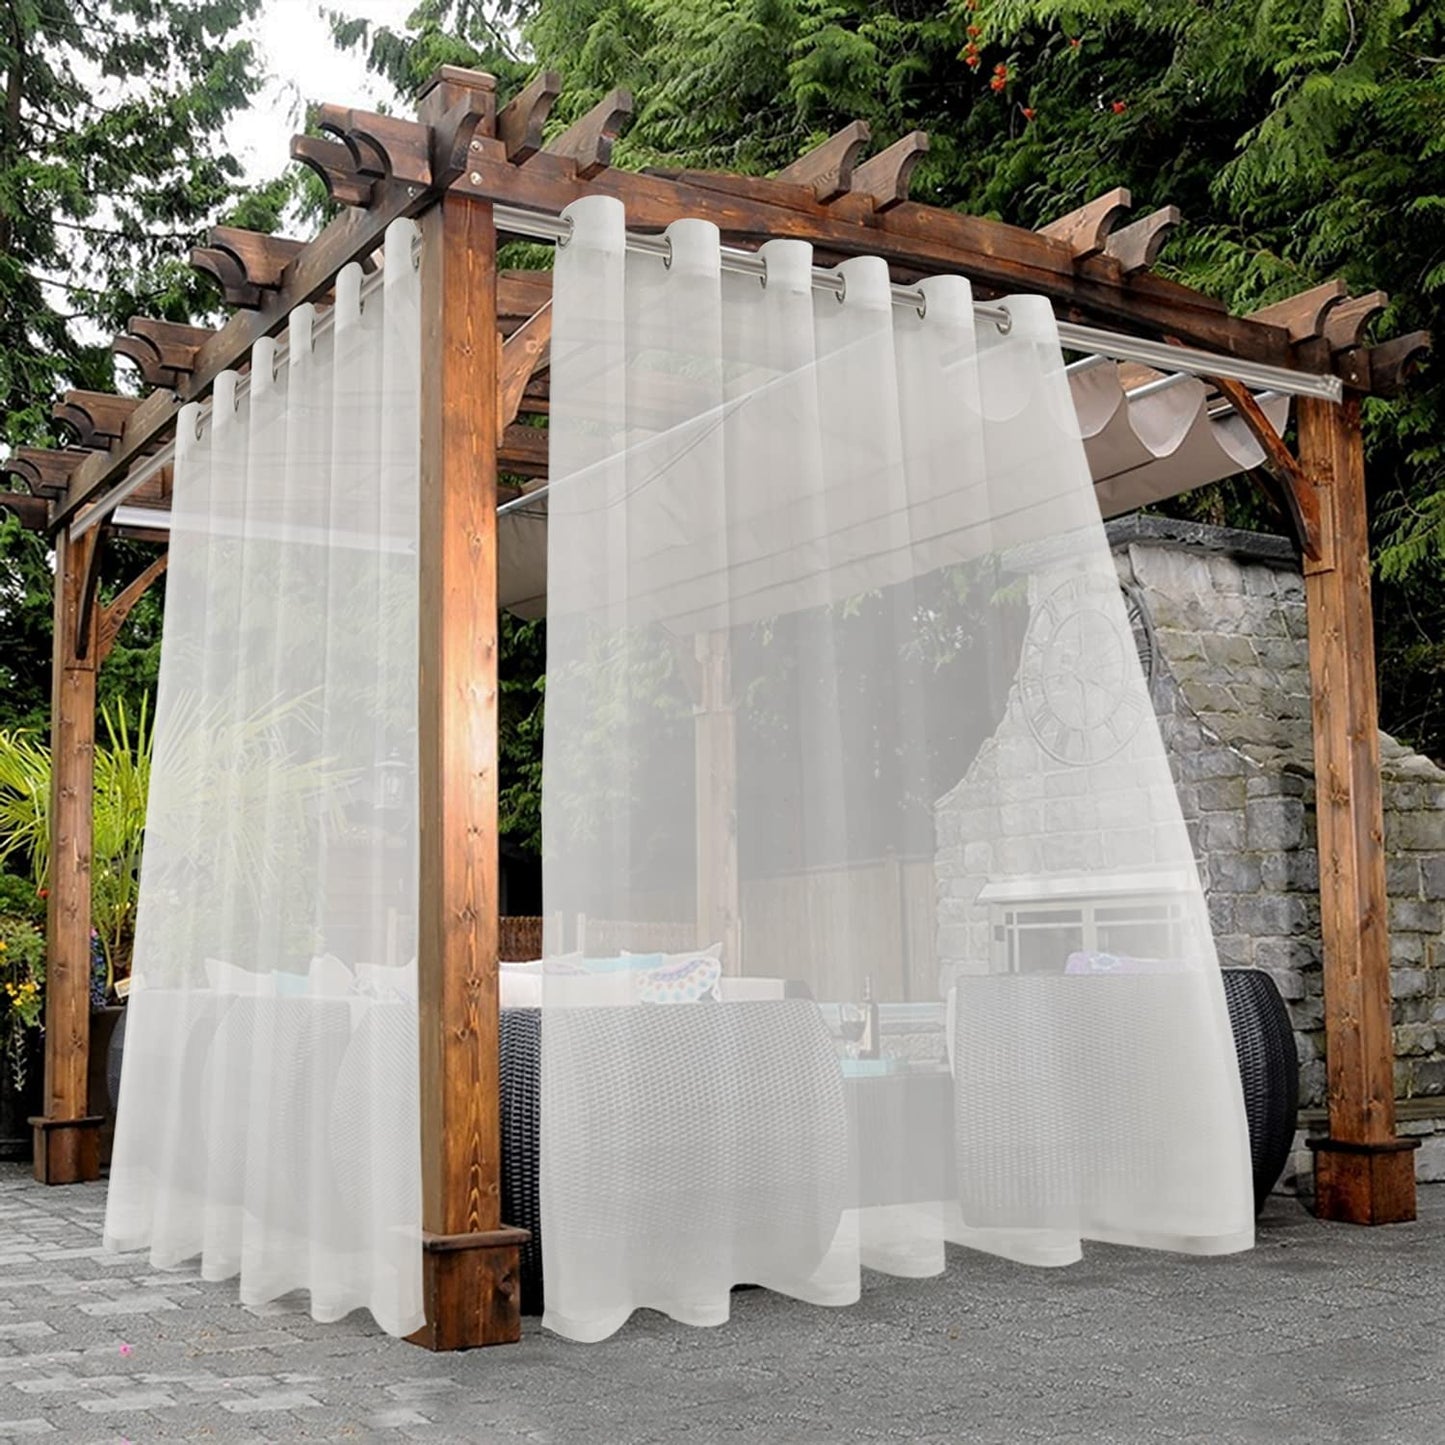 BONZER White Outdoor Sheer Curtains for Patio Waterproof - 2 Panels Grommet Indoor Voile Sheer Curtain for Living Room, Bedroom, Porch, Pergola, Cabana,54 X 84 Inch, White  BONZER Beige 100W X 95L Inch 